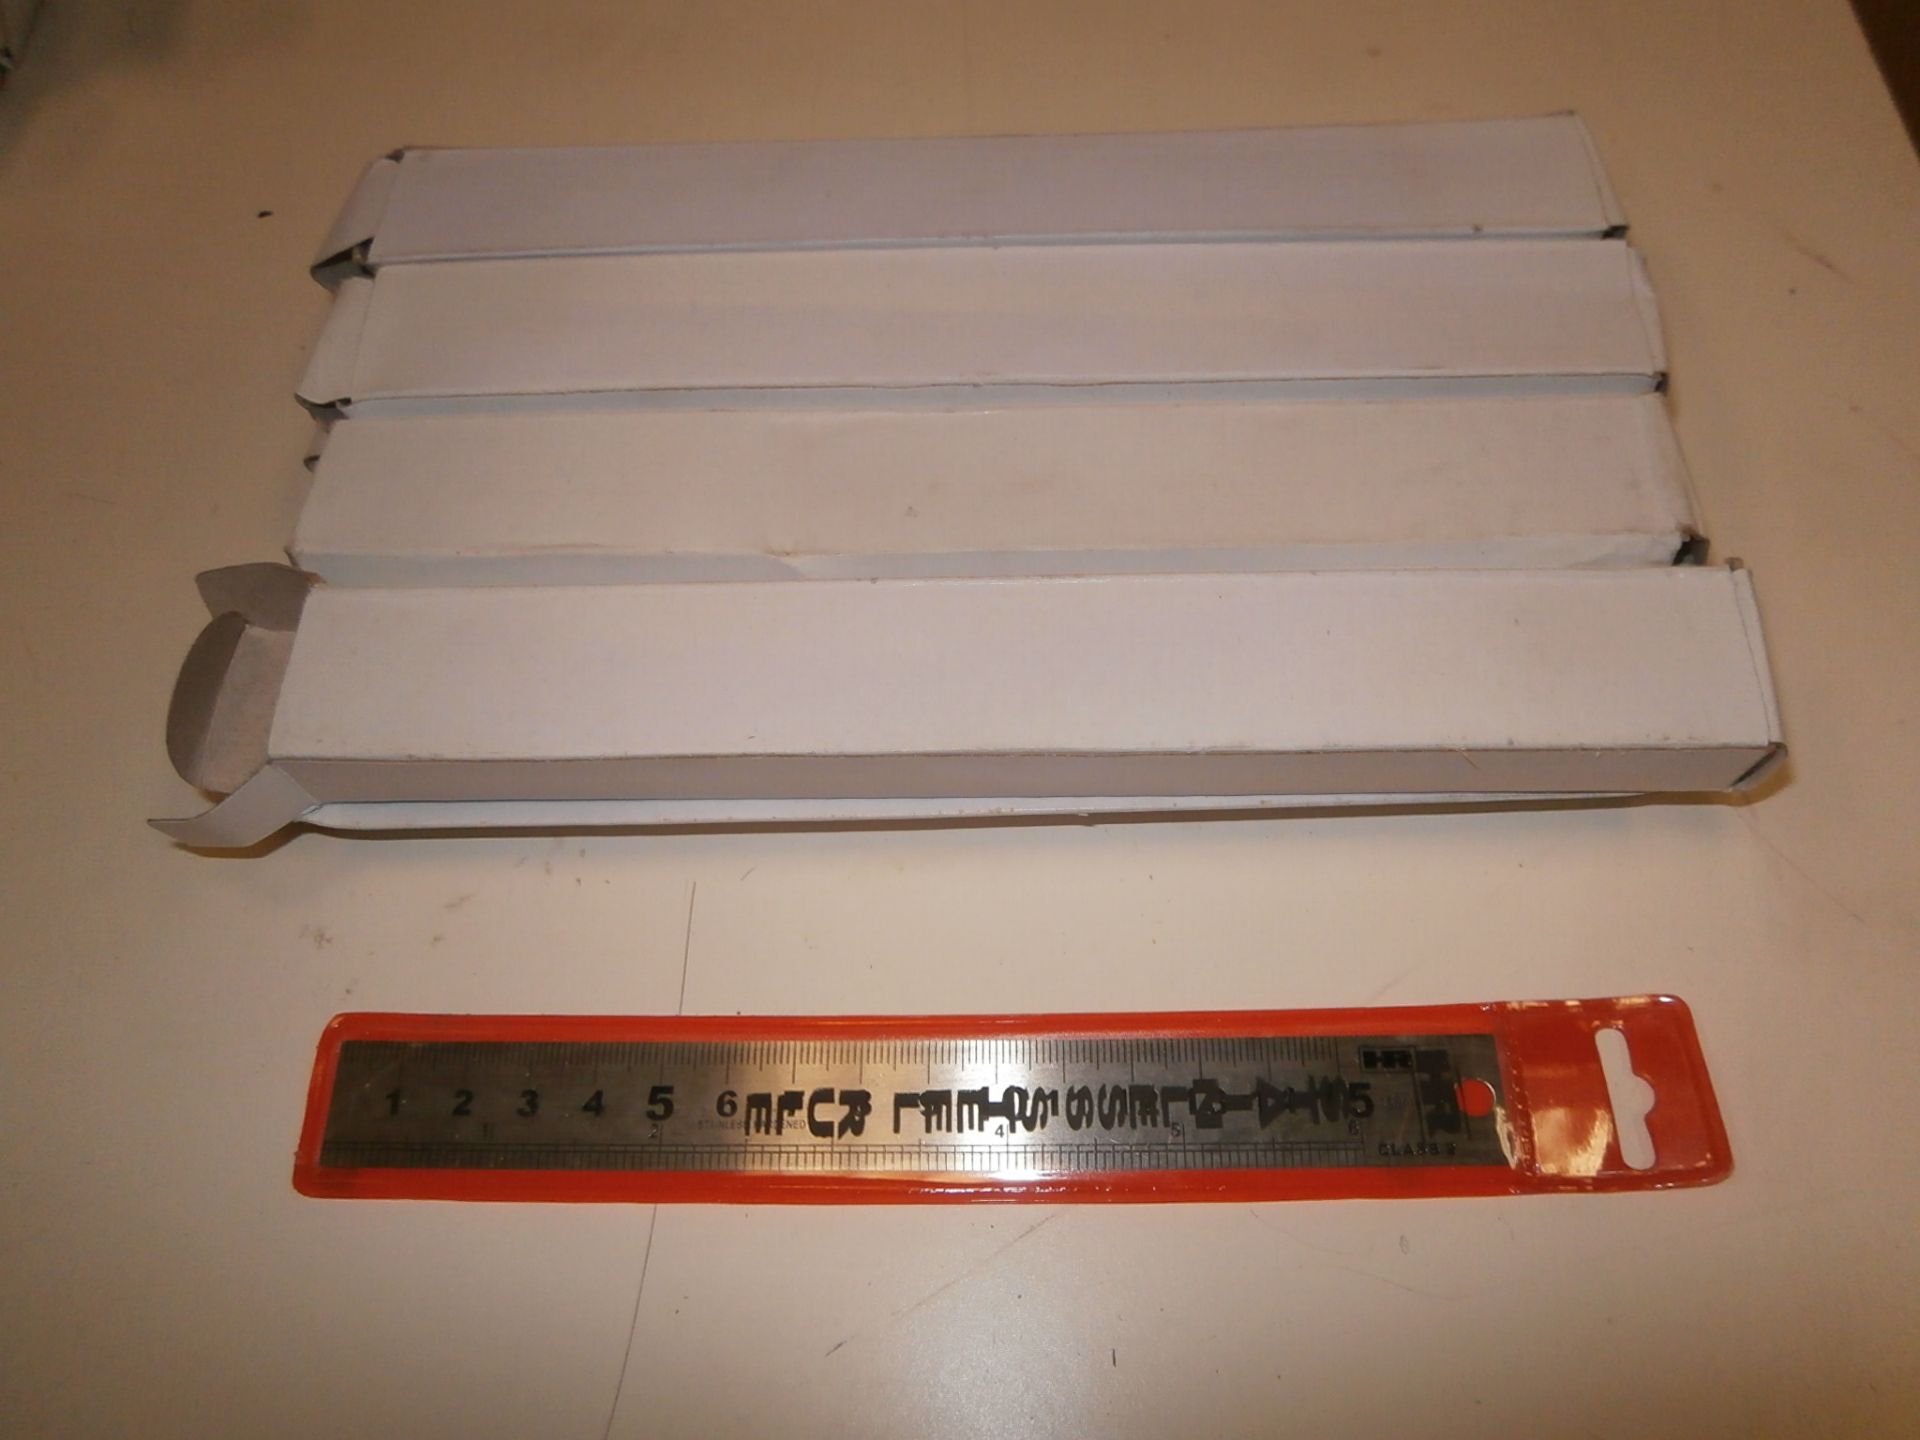 8 Boxes of HR 150MM Stainless steel Engineers Rulers approx 9 rulers per box. (CS)